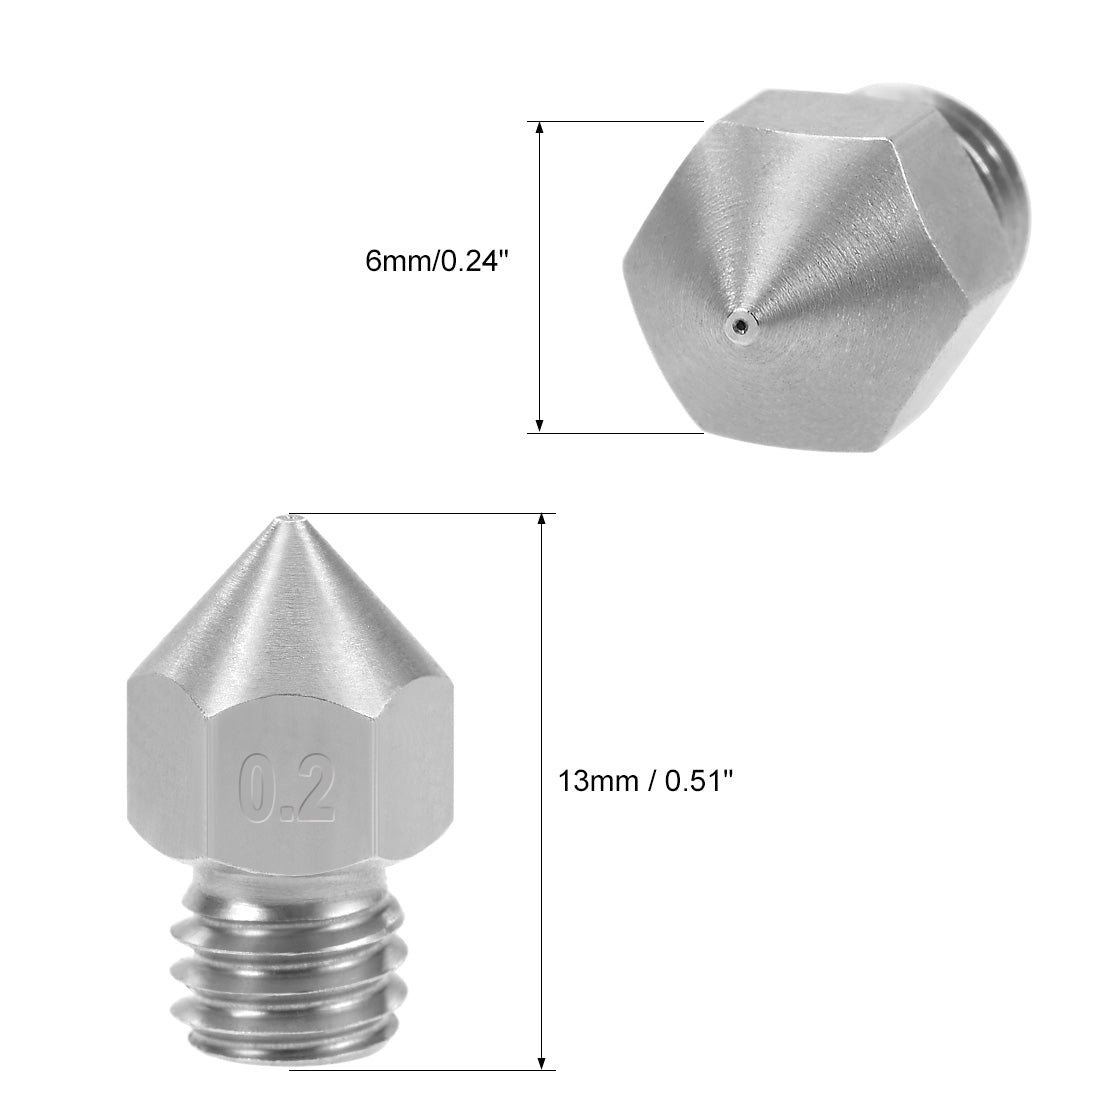 uxcell Uxcell 0.2mm 3D Printer Nozzle Head M6 for MK8 1.75mm, Stainless Steel 5pcs